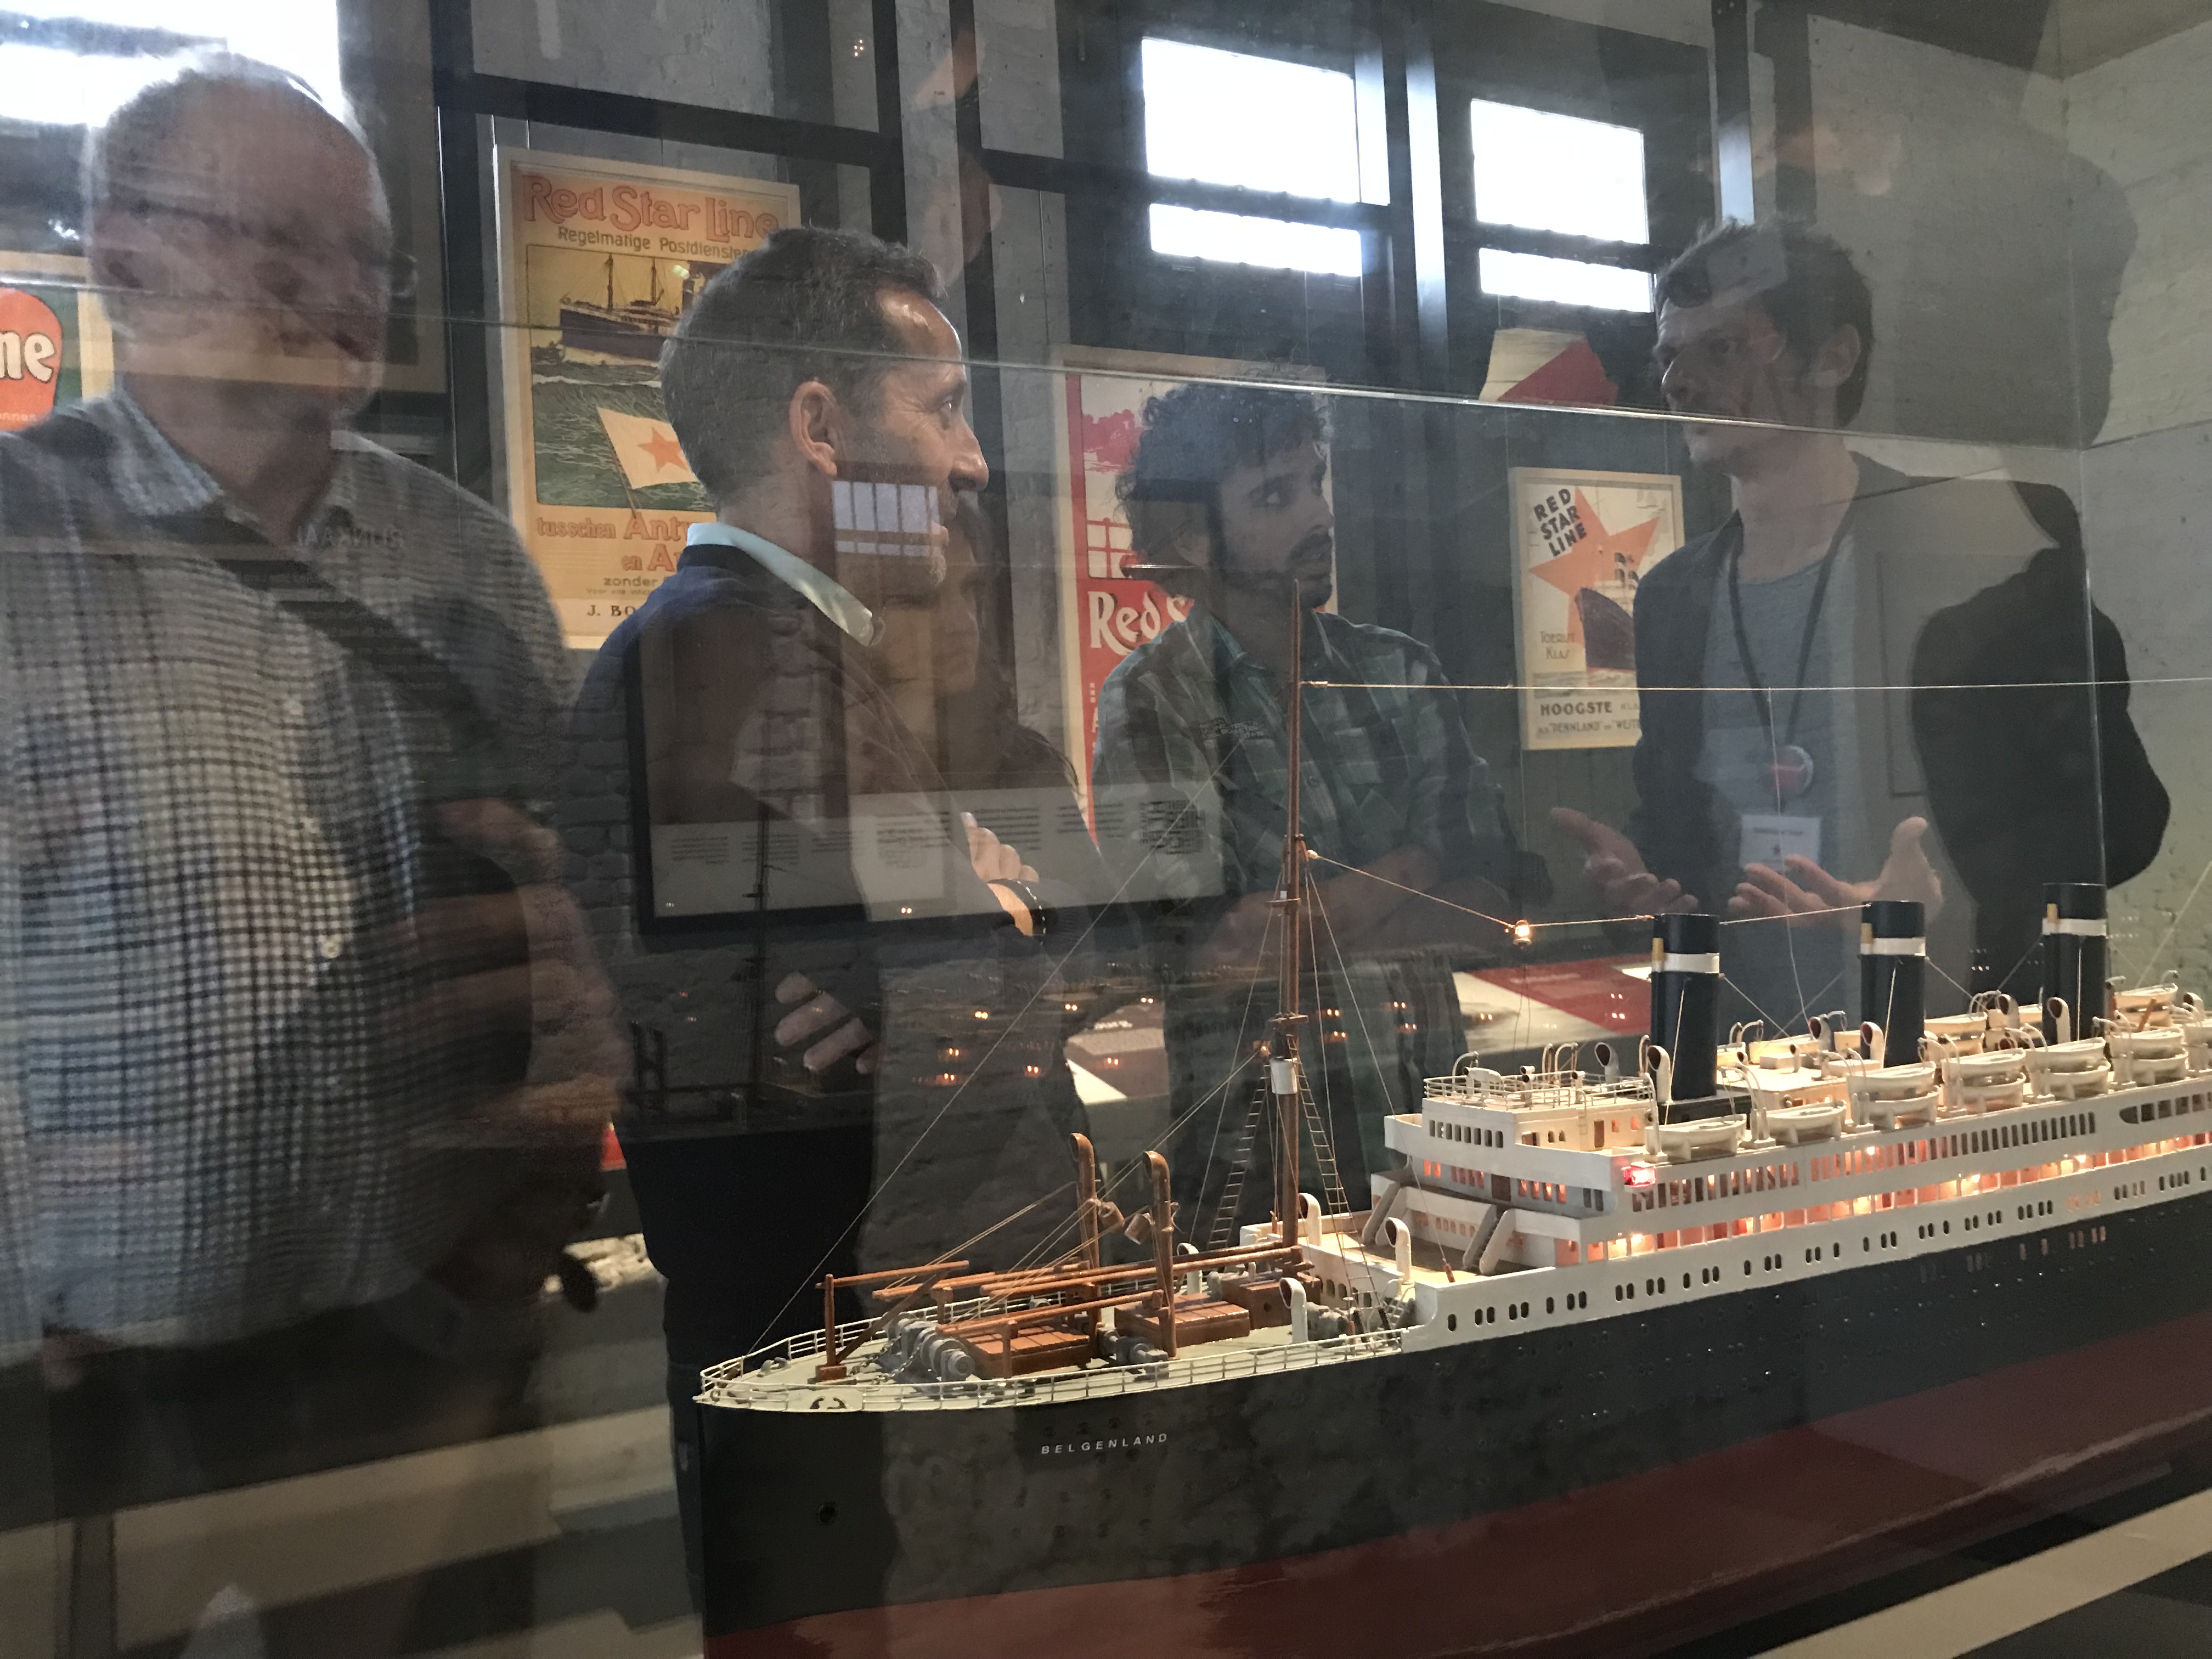 Model ship in museum exhibition